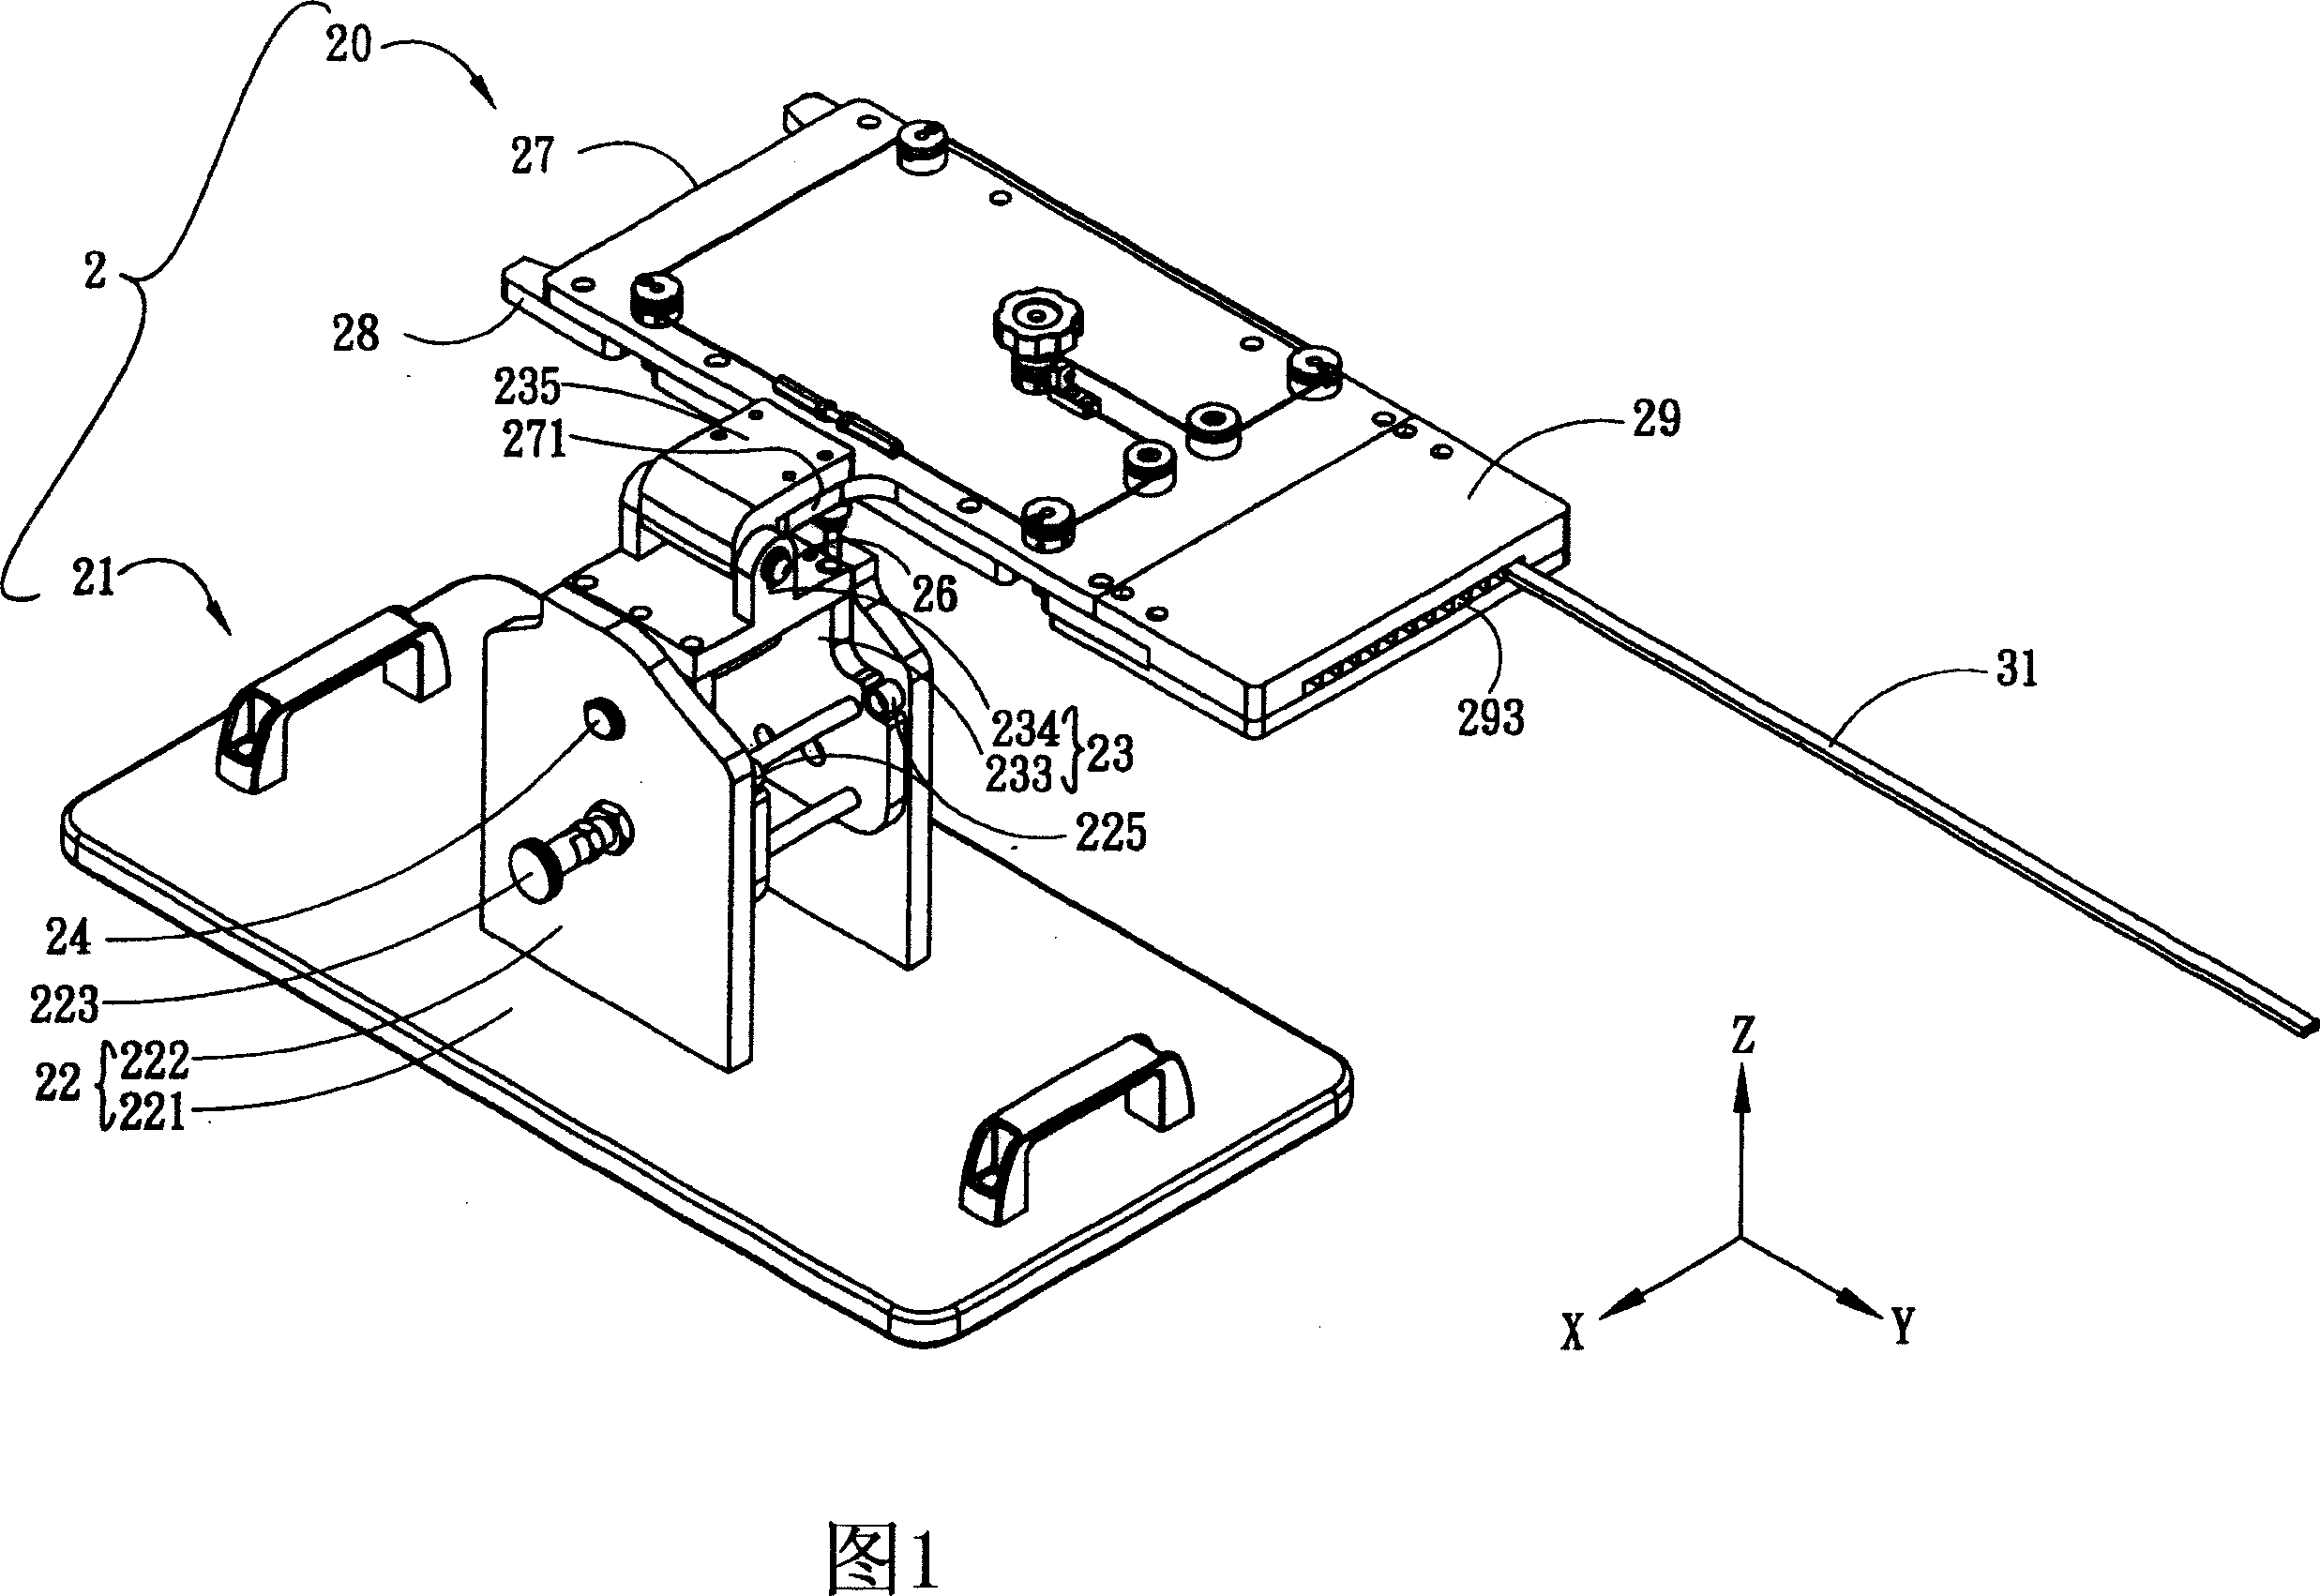 Container conversion device for semi-conductor packaging element